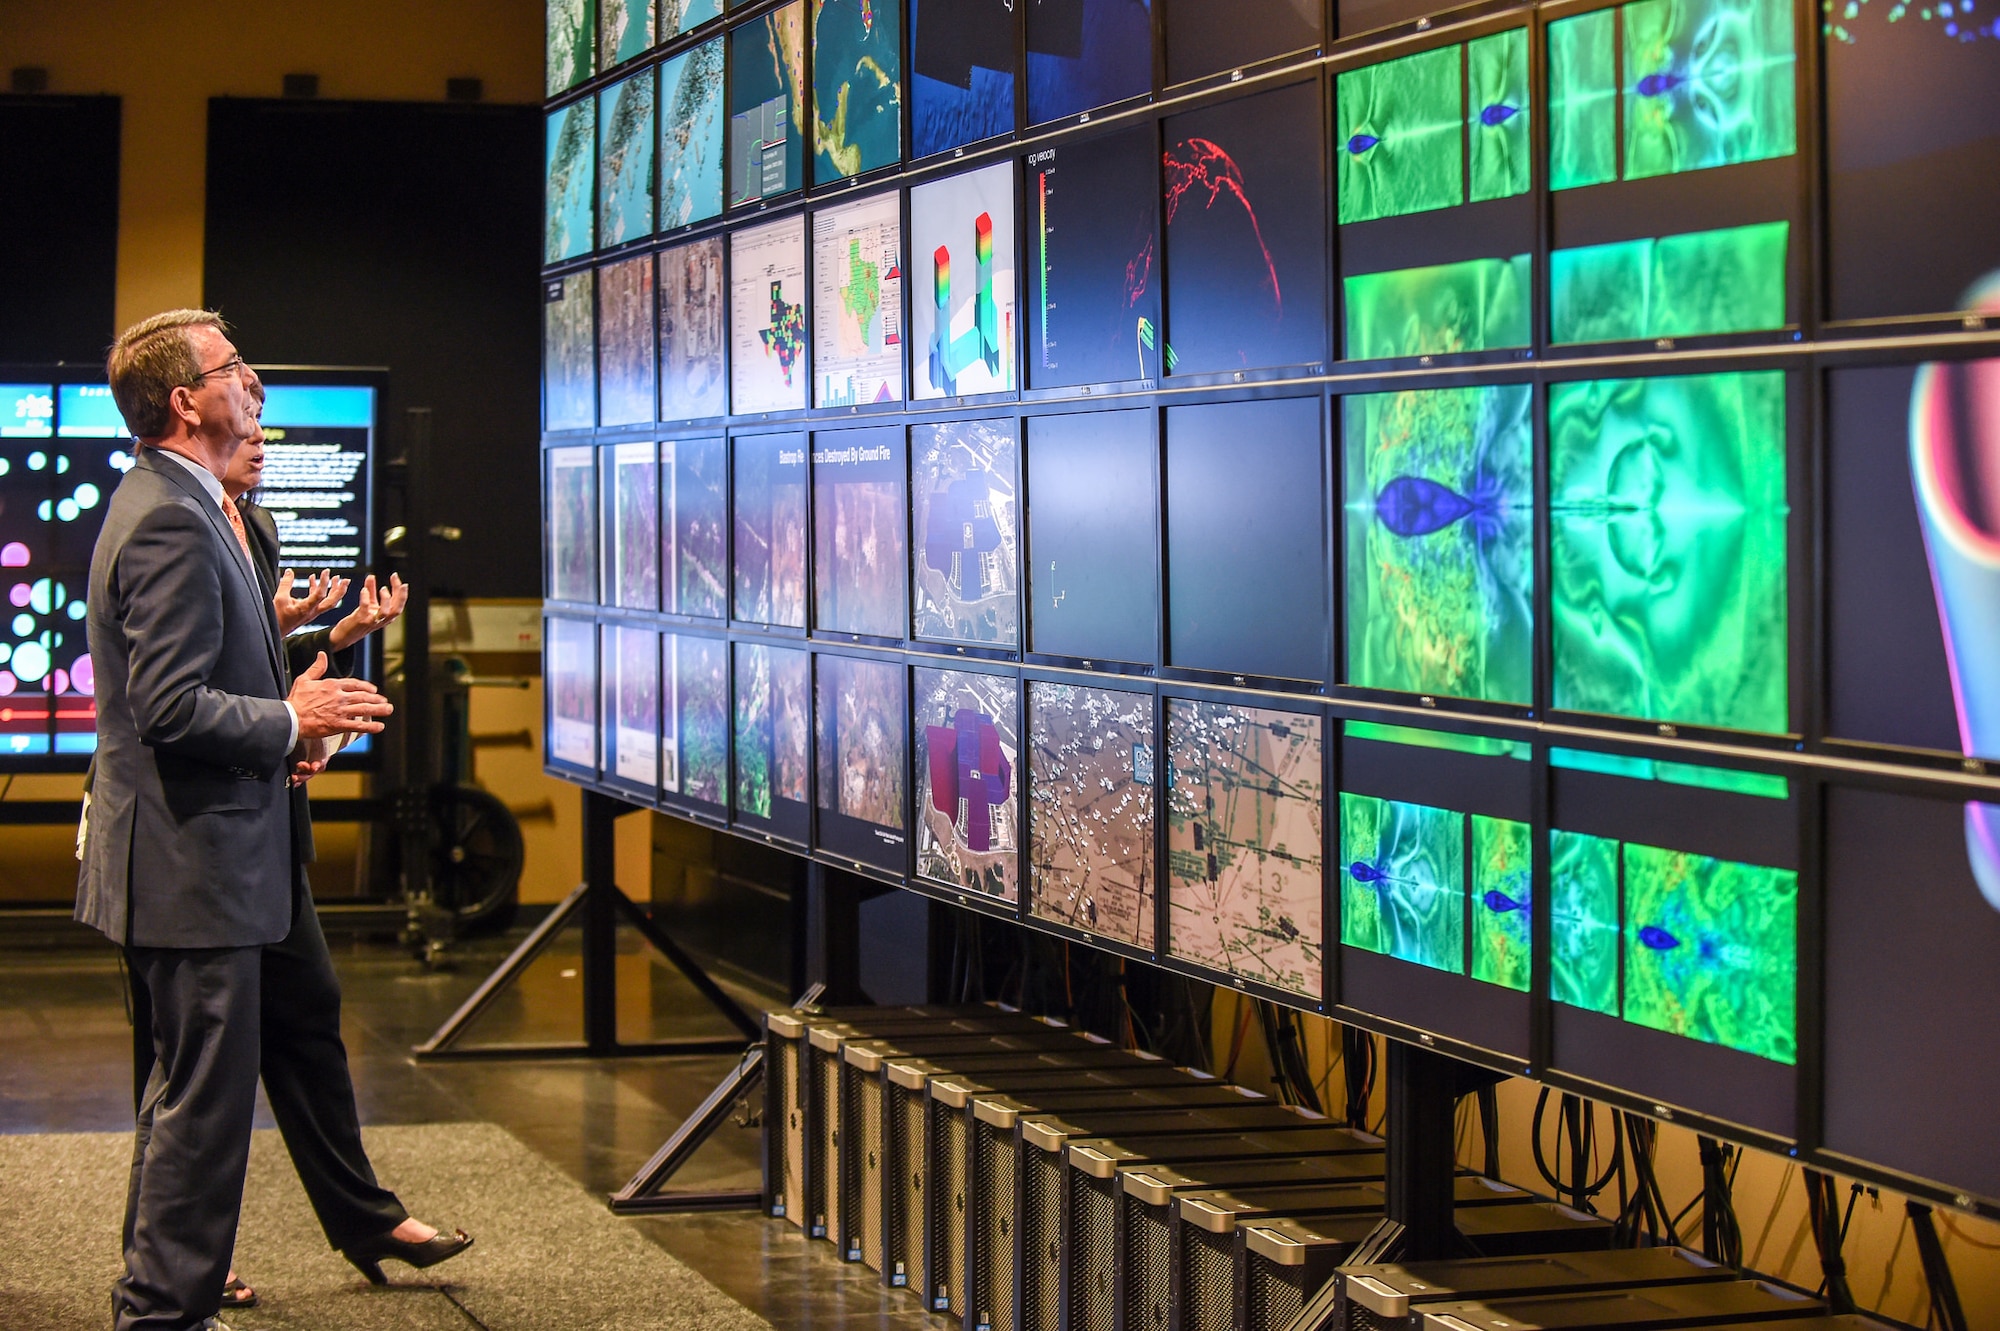 Defense Secretary Ash Carter tours Texas Advanced Computing Center and Visualization Lab, March 31, 2016. DoD photo by Army Sgt. 1st Class Clydell Kinchen